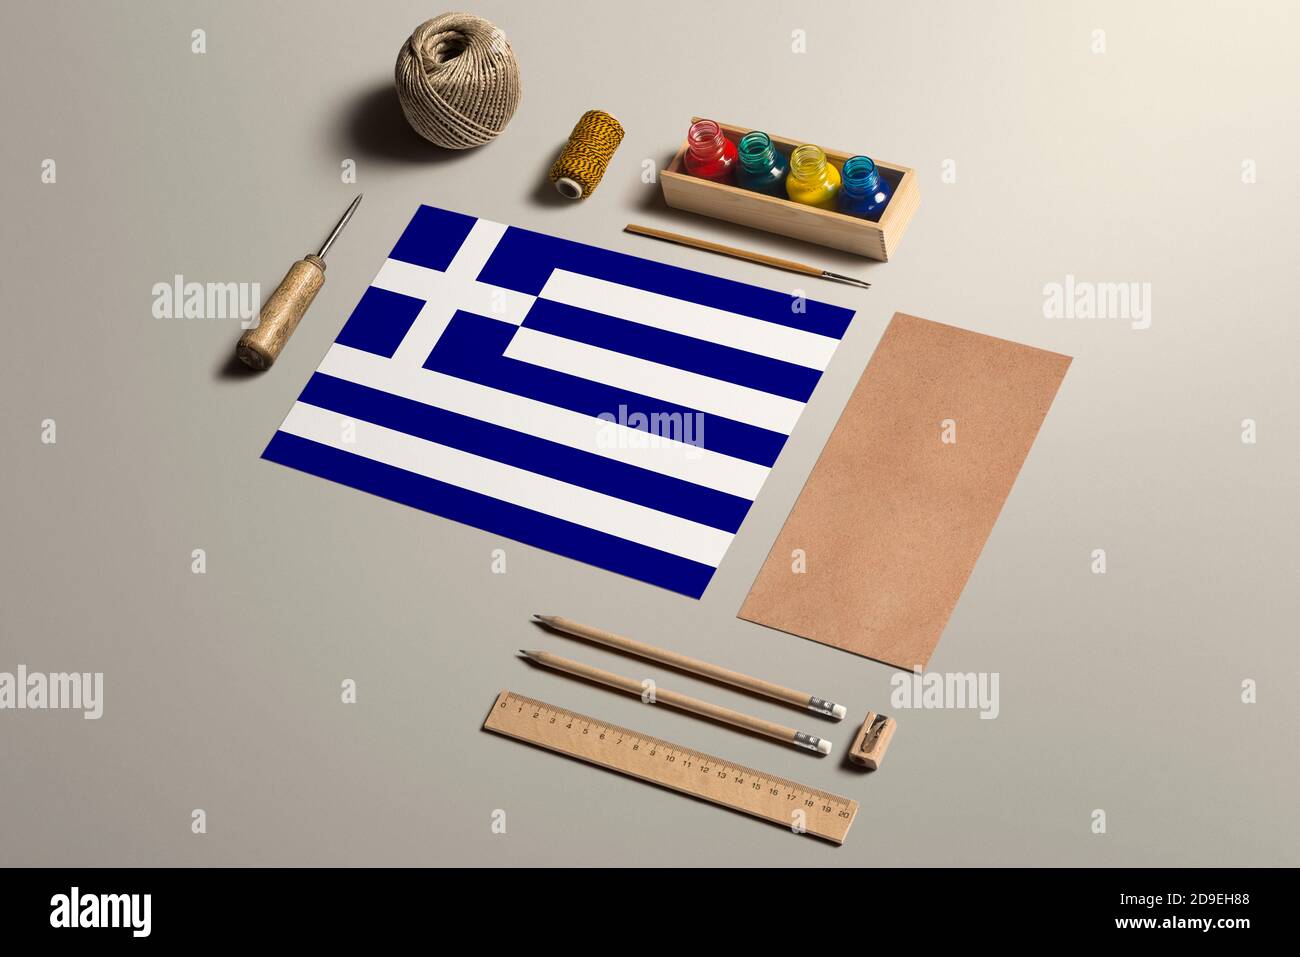 Greece calligraphy concept, accessories and tools for beautiful handwriting, pencils, pens, ink, brush, craft paper and cardboard crafting on wooden t Stock Photo